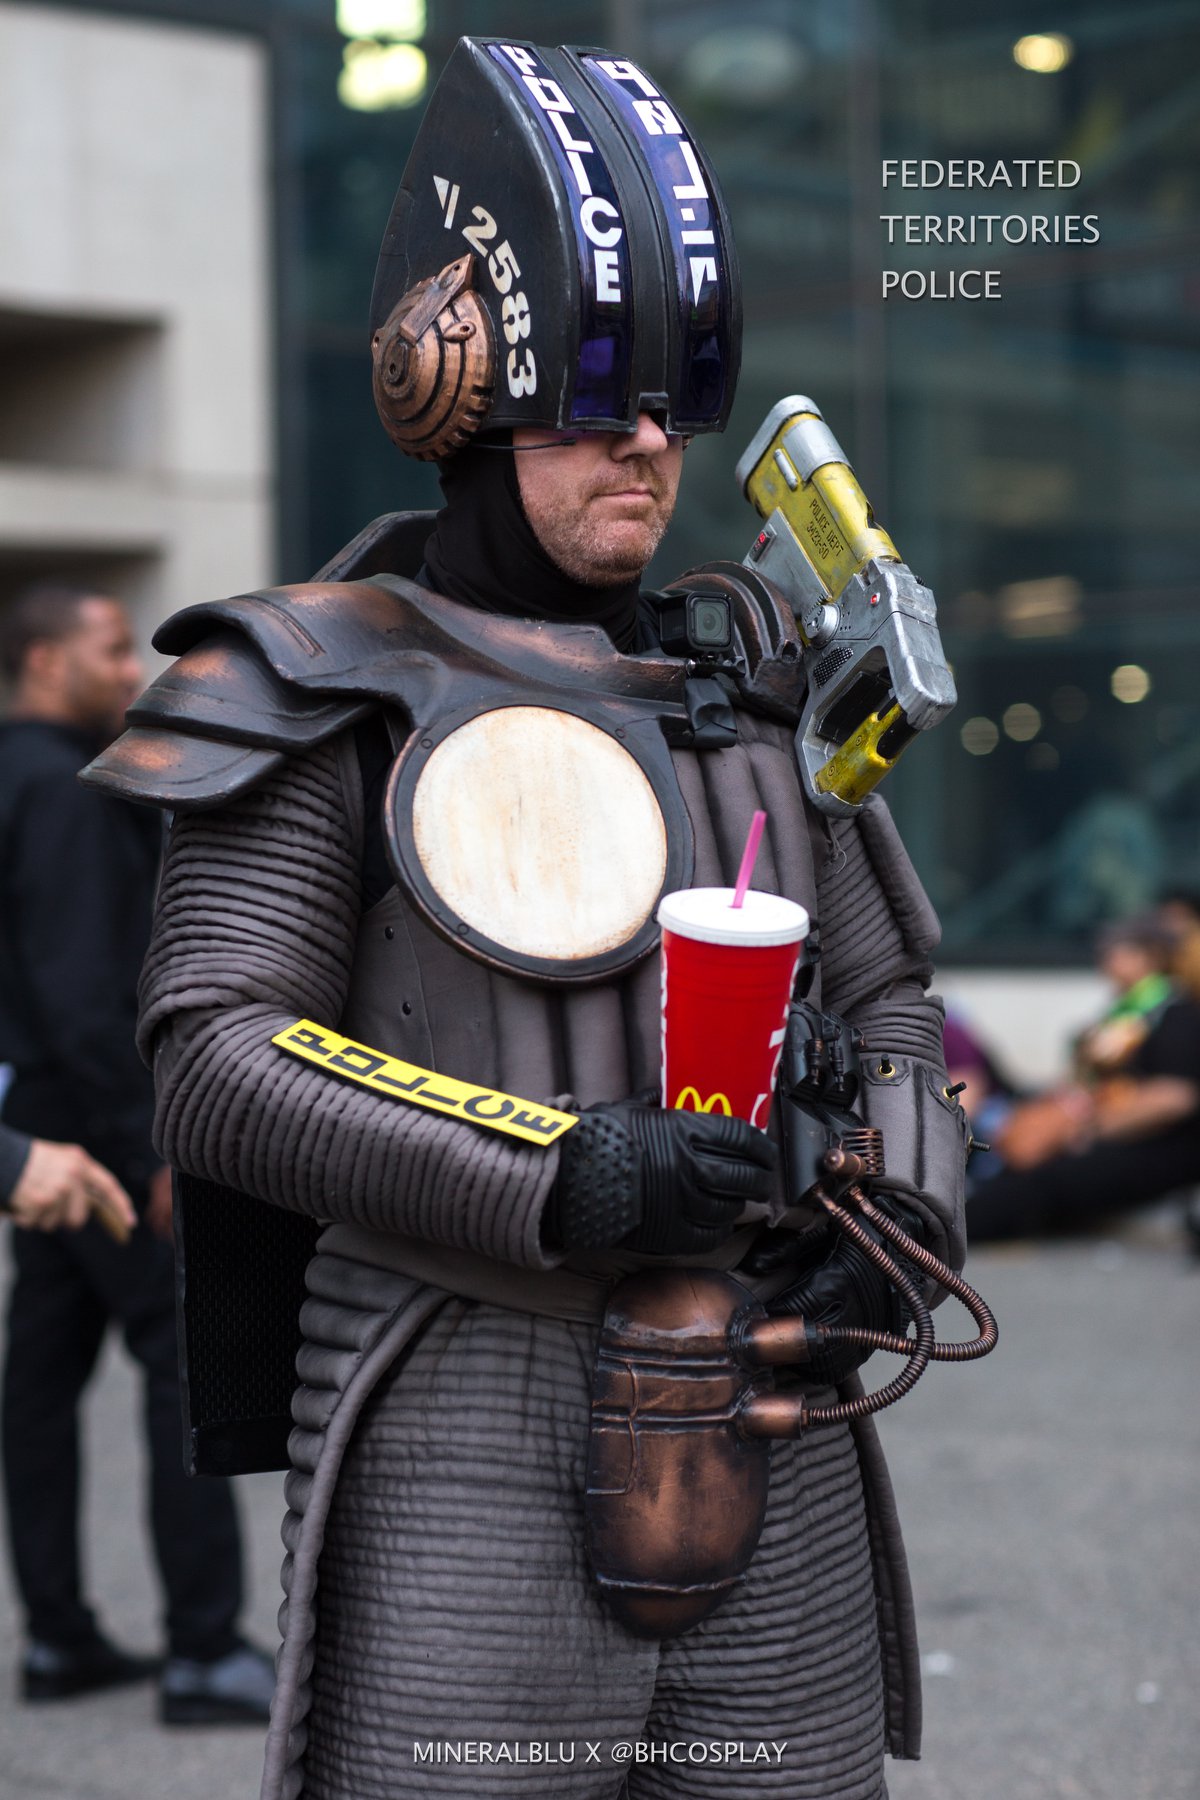 Our Favourite Cosplay From New York Comic-Con, 2013-2019